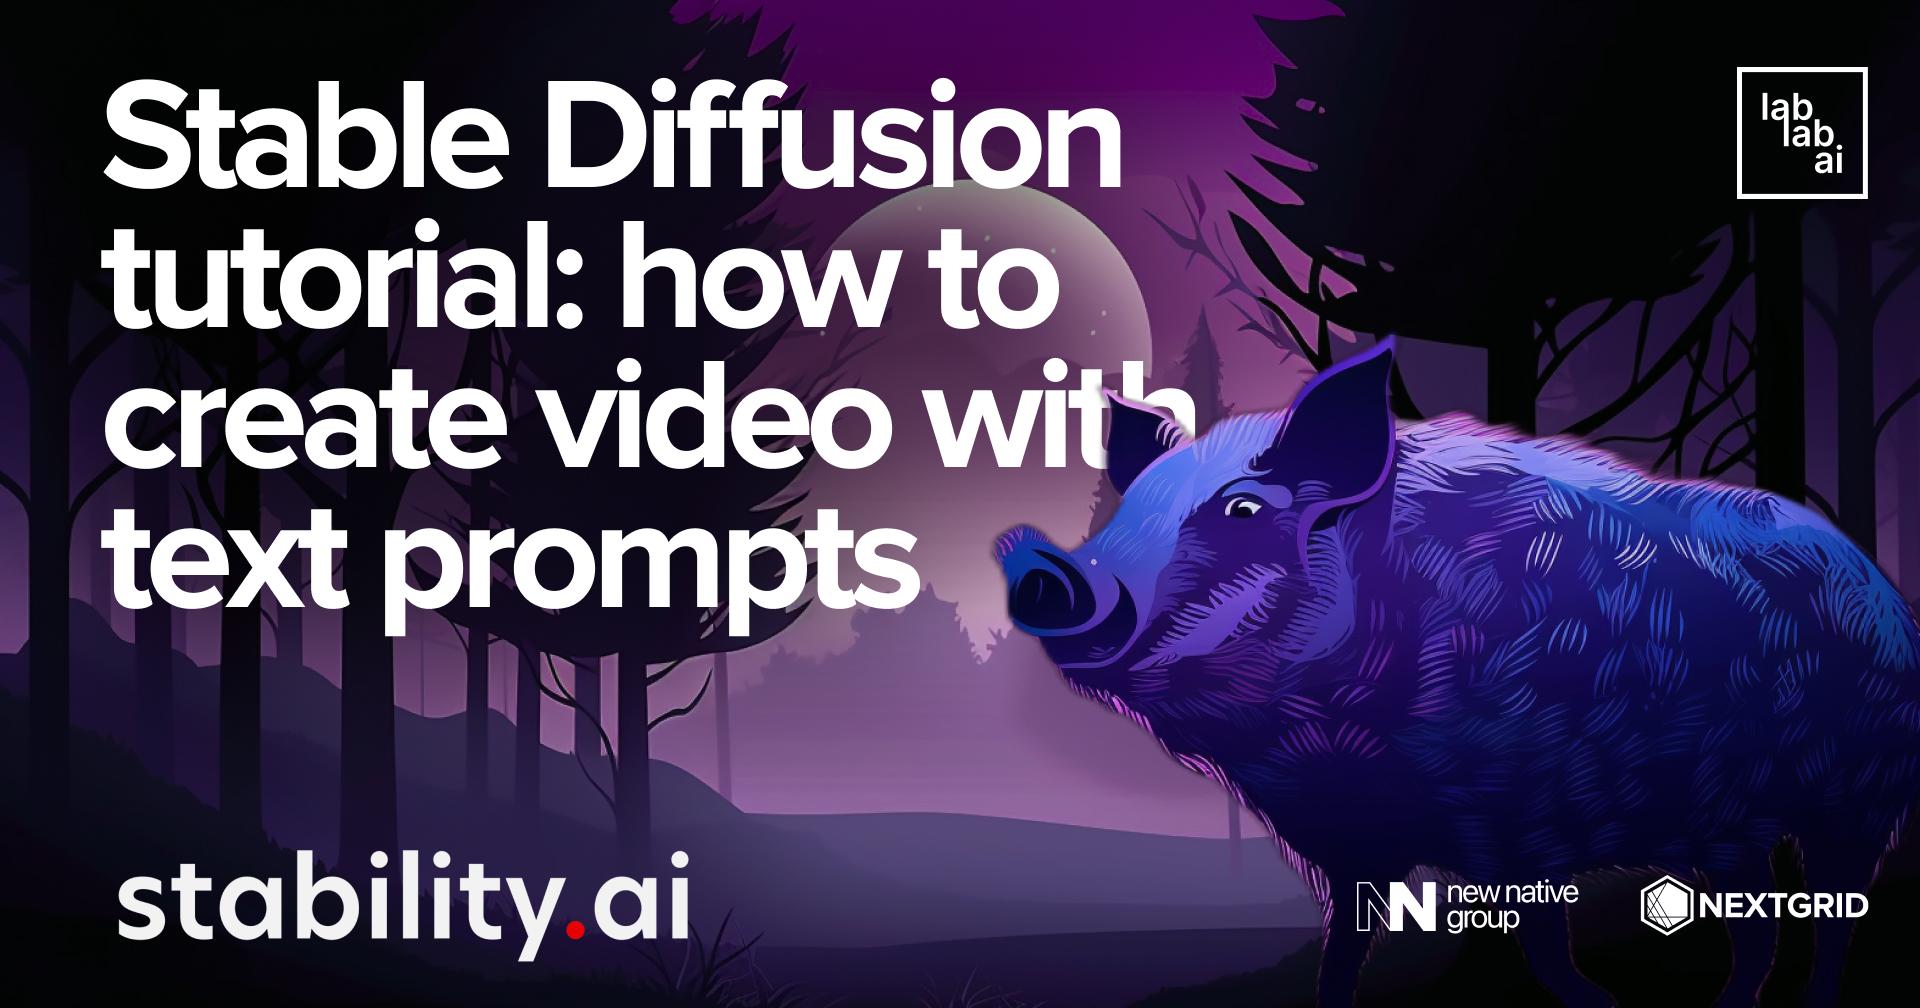 Stable Diffusion tutorial: how to create video with text prompts